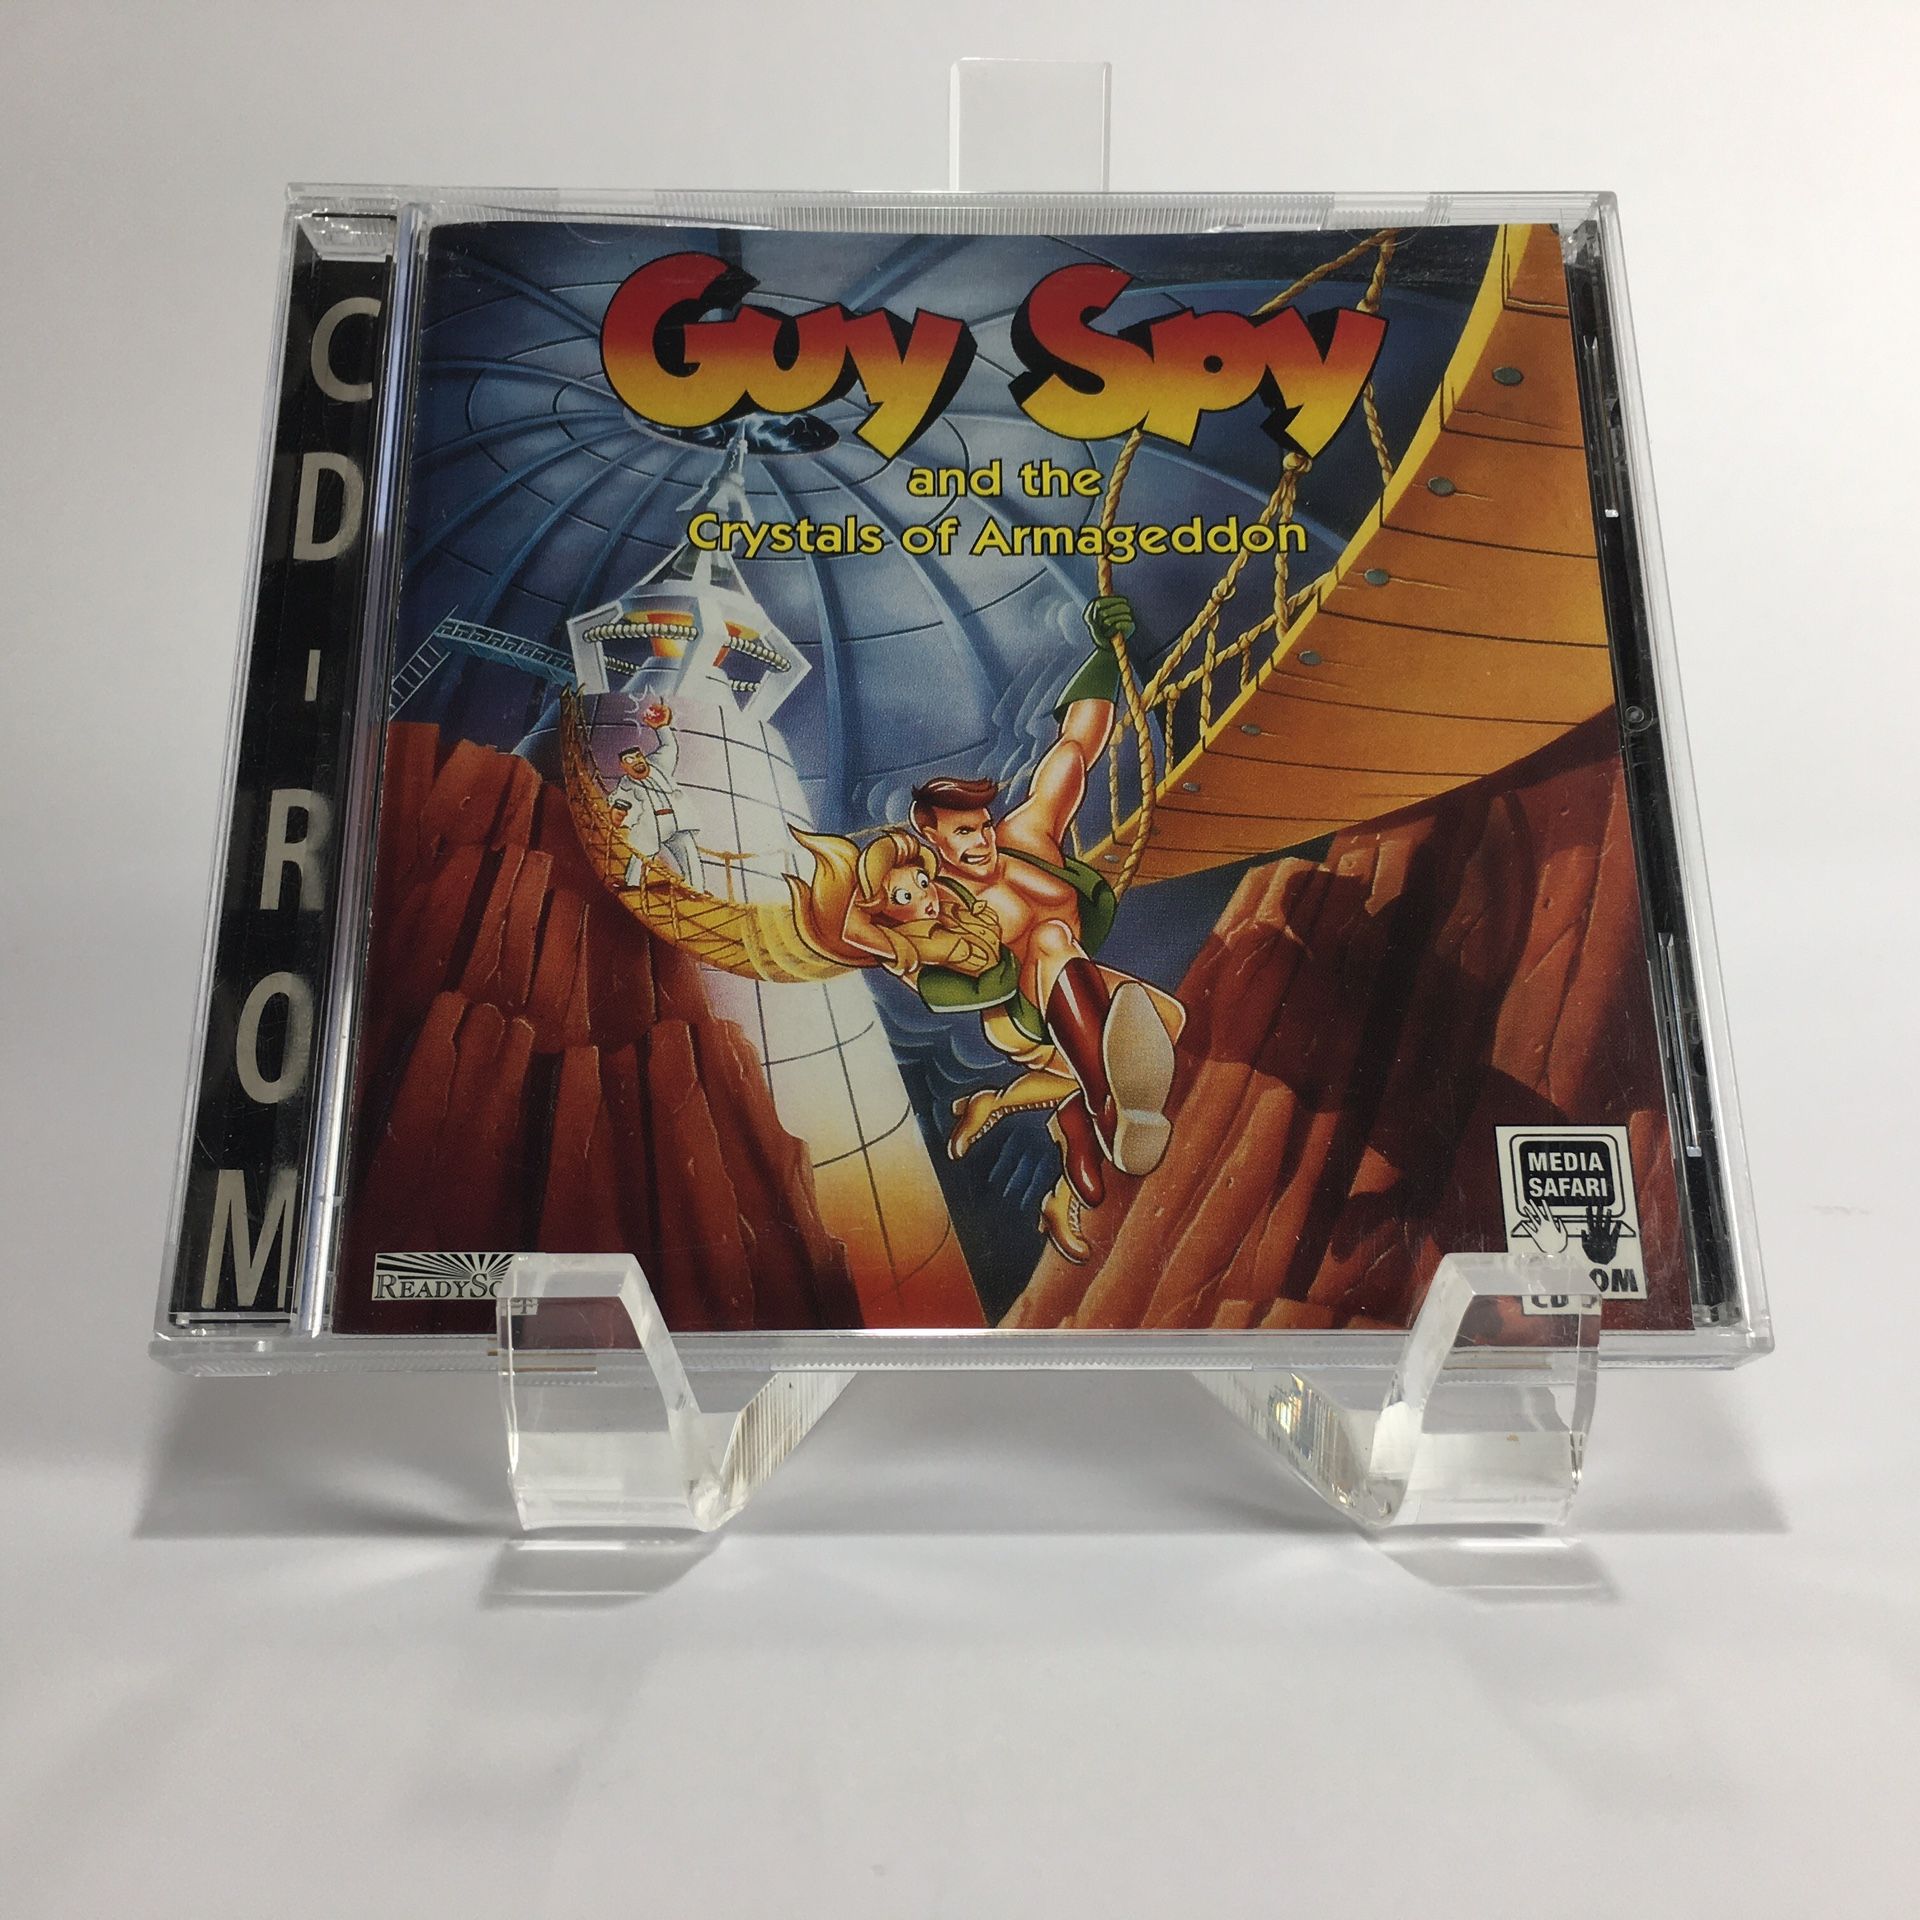 Guy Spy And The Crystals Of Armageddon PC CD ROM